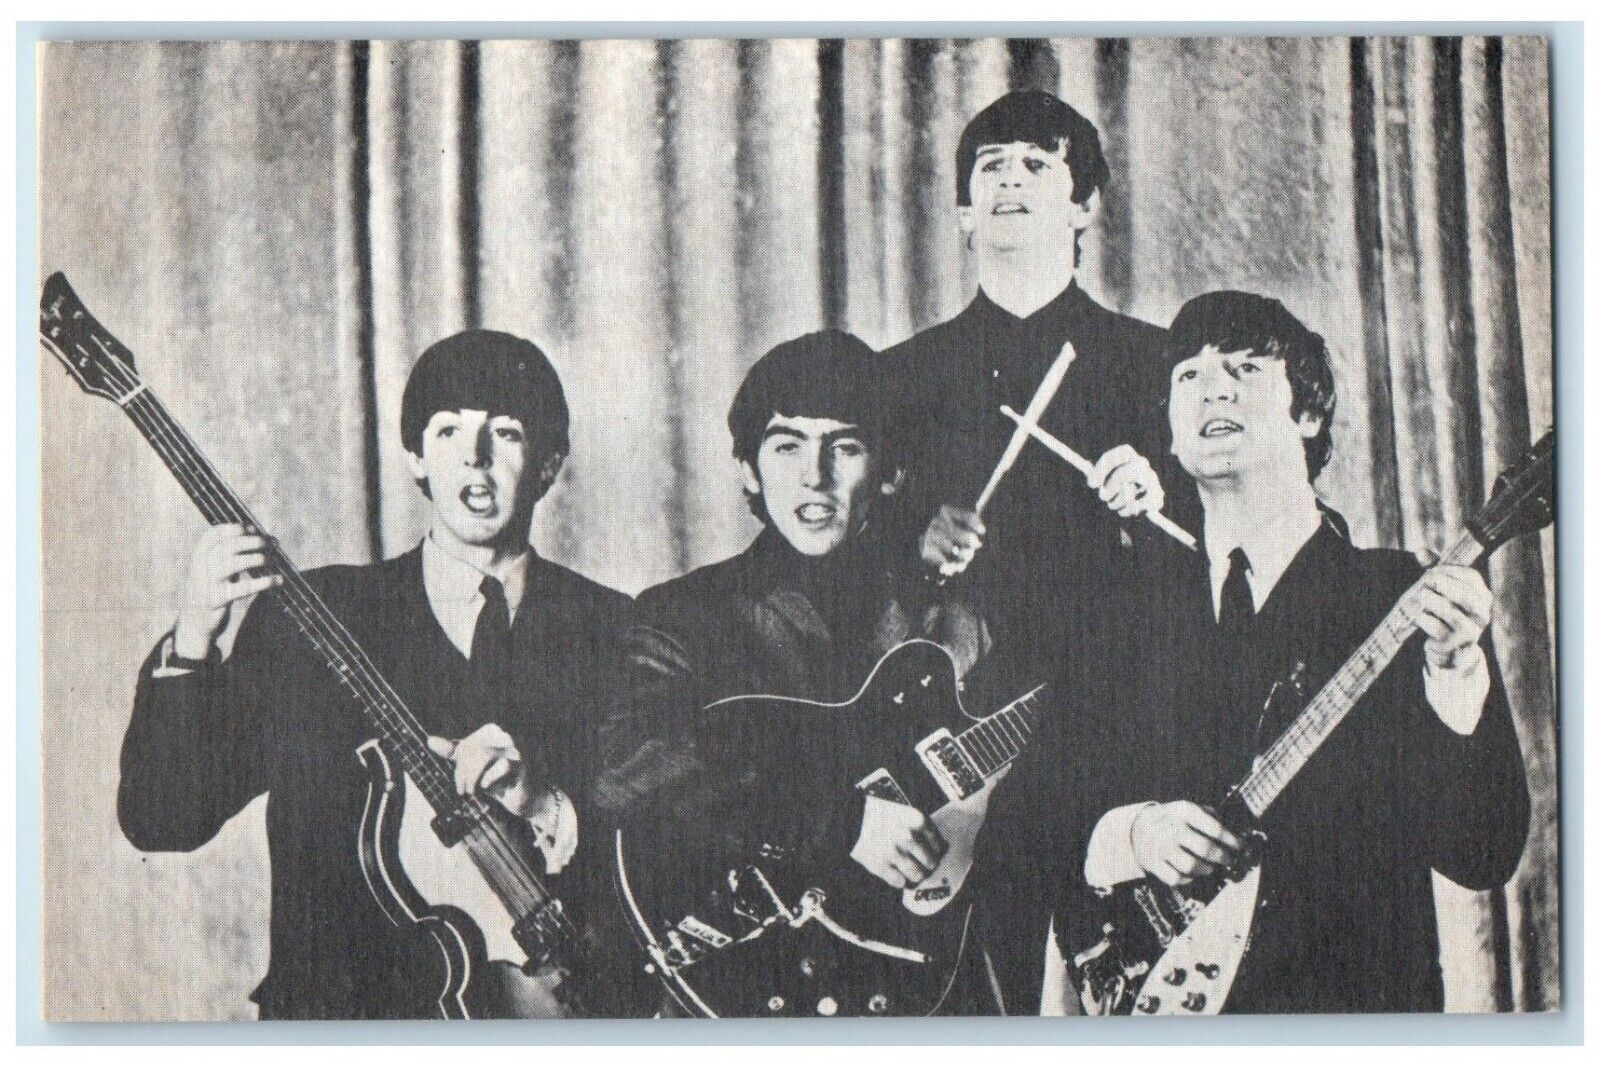 1964 The Beatles Rock Band Musicians Members Formed In Liverpool Postcard